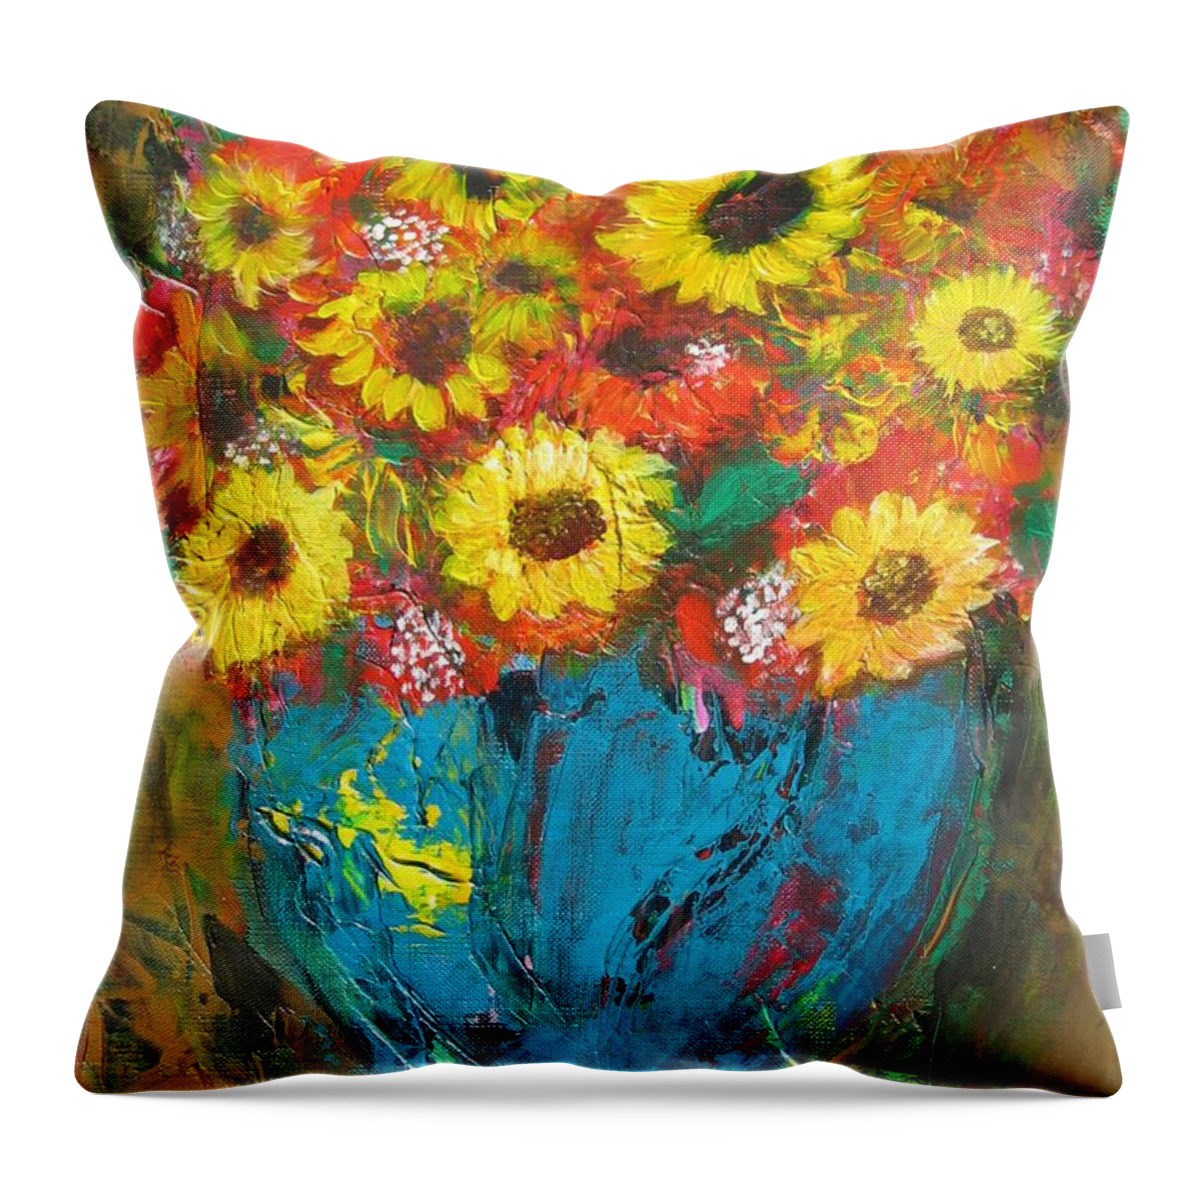 Acrylic Throw Pillow featuring the painting Good Morning Sunshine by Maria Watt